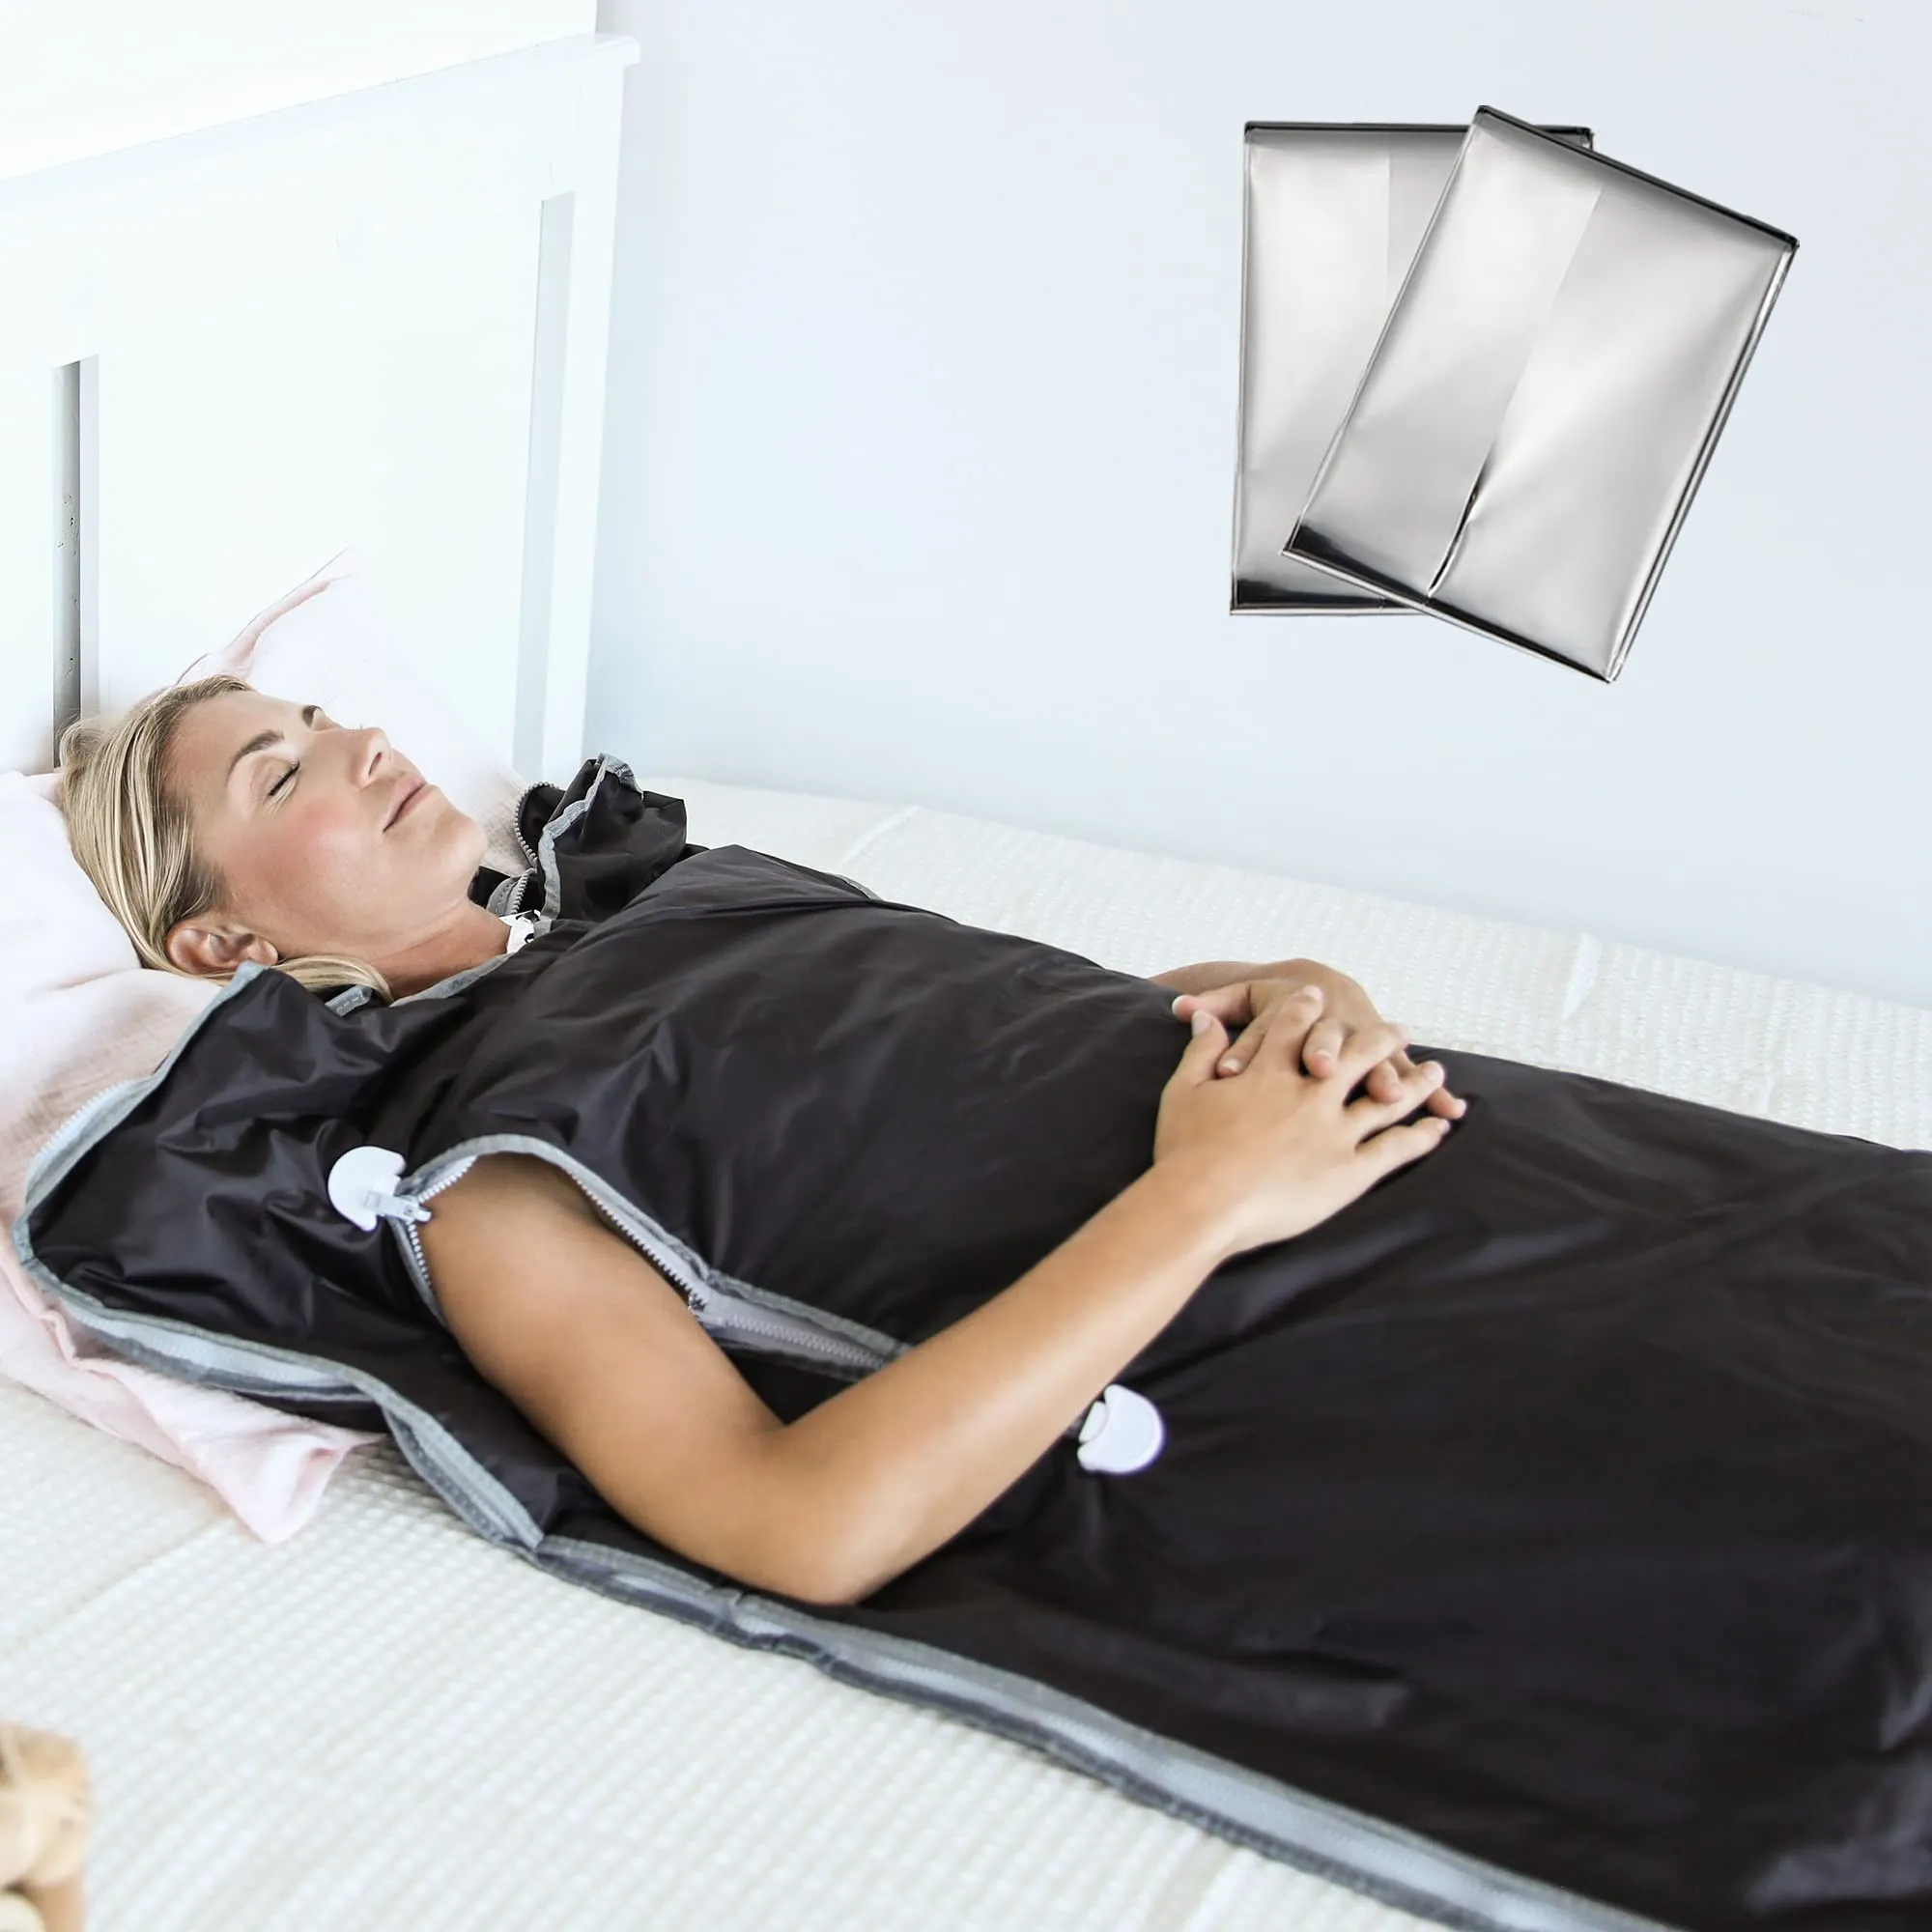 

An image of a person lying in an infrared sauna blanket, with a peaceful expression on their face, surrounded by a warm, glowing light. The image conveys the feeling of relaxation and comfort that comes from using an infrared sauna blanket